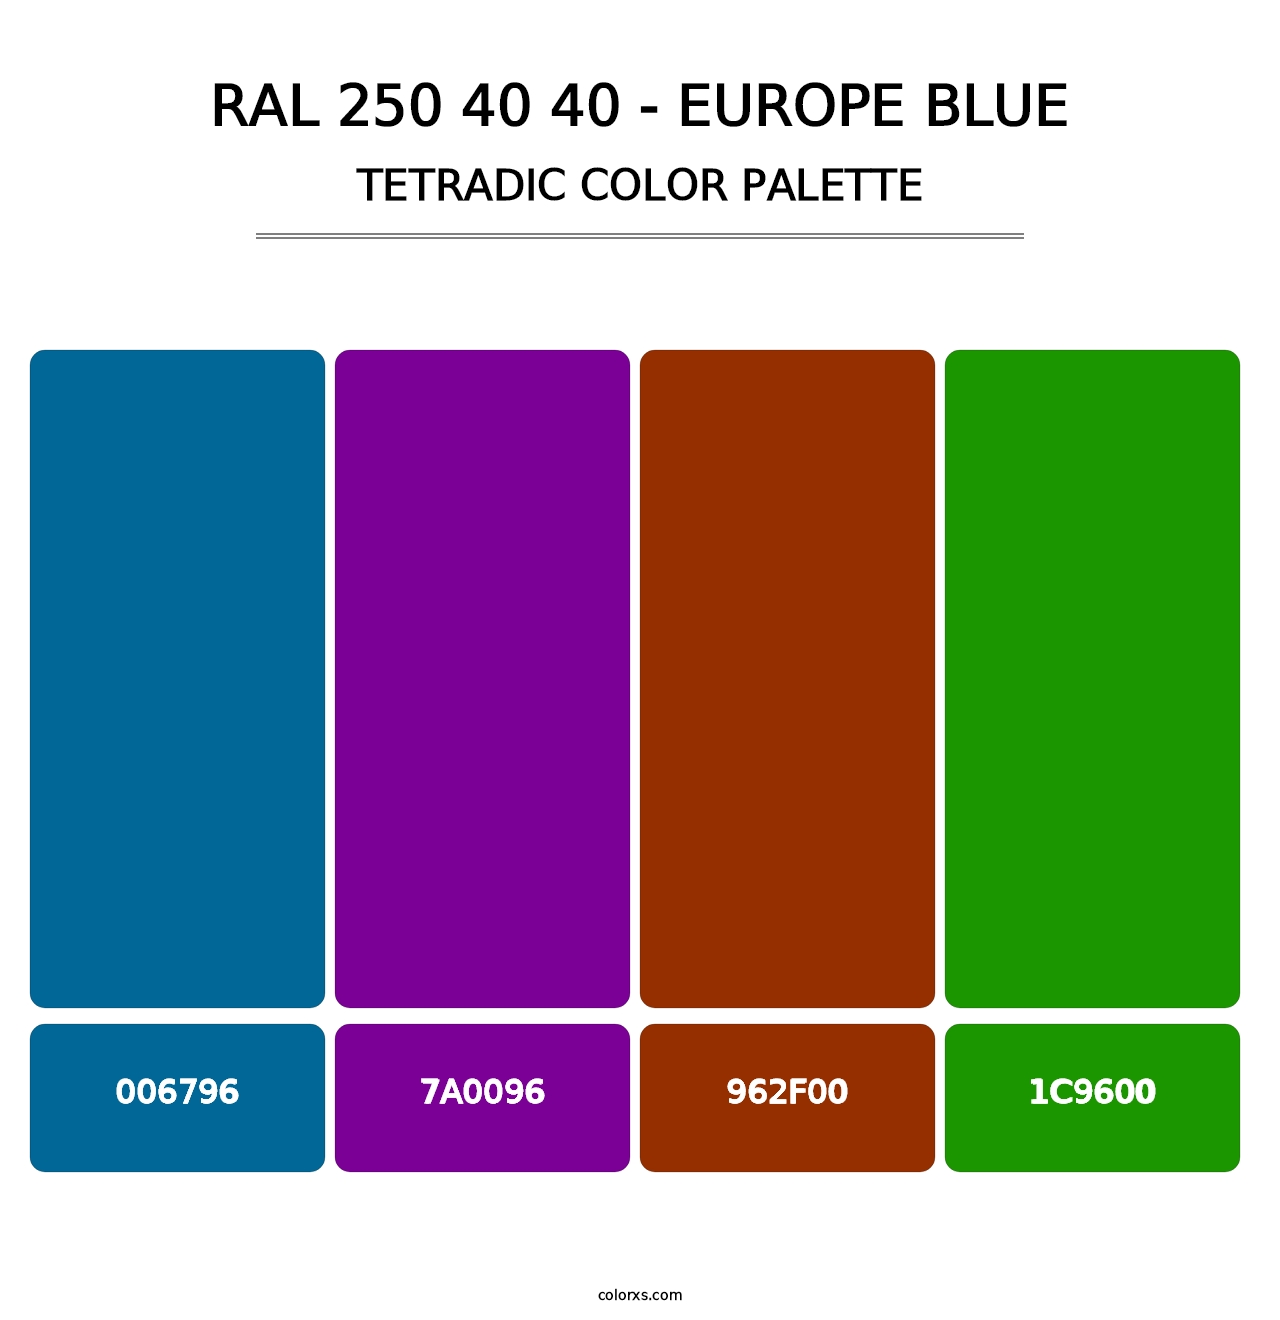 RAL 250 40 40 - Europe Blue - Tetradic Color Palette